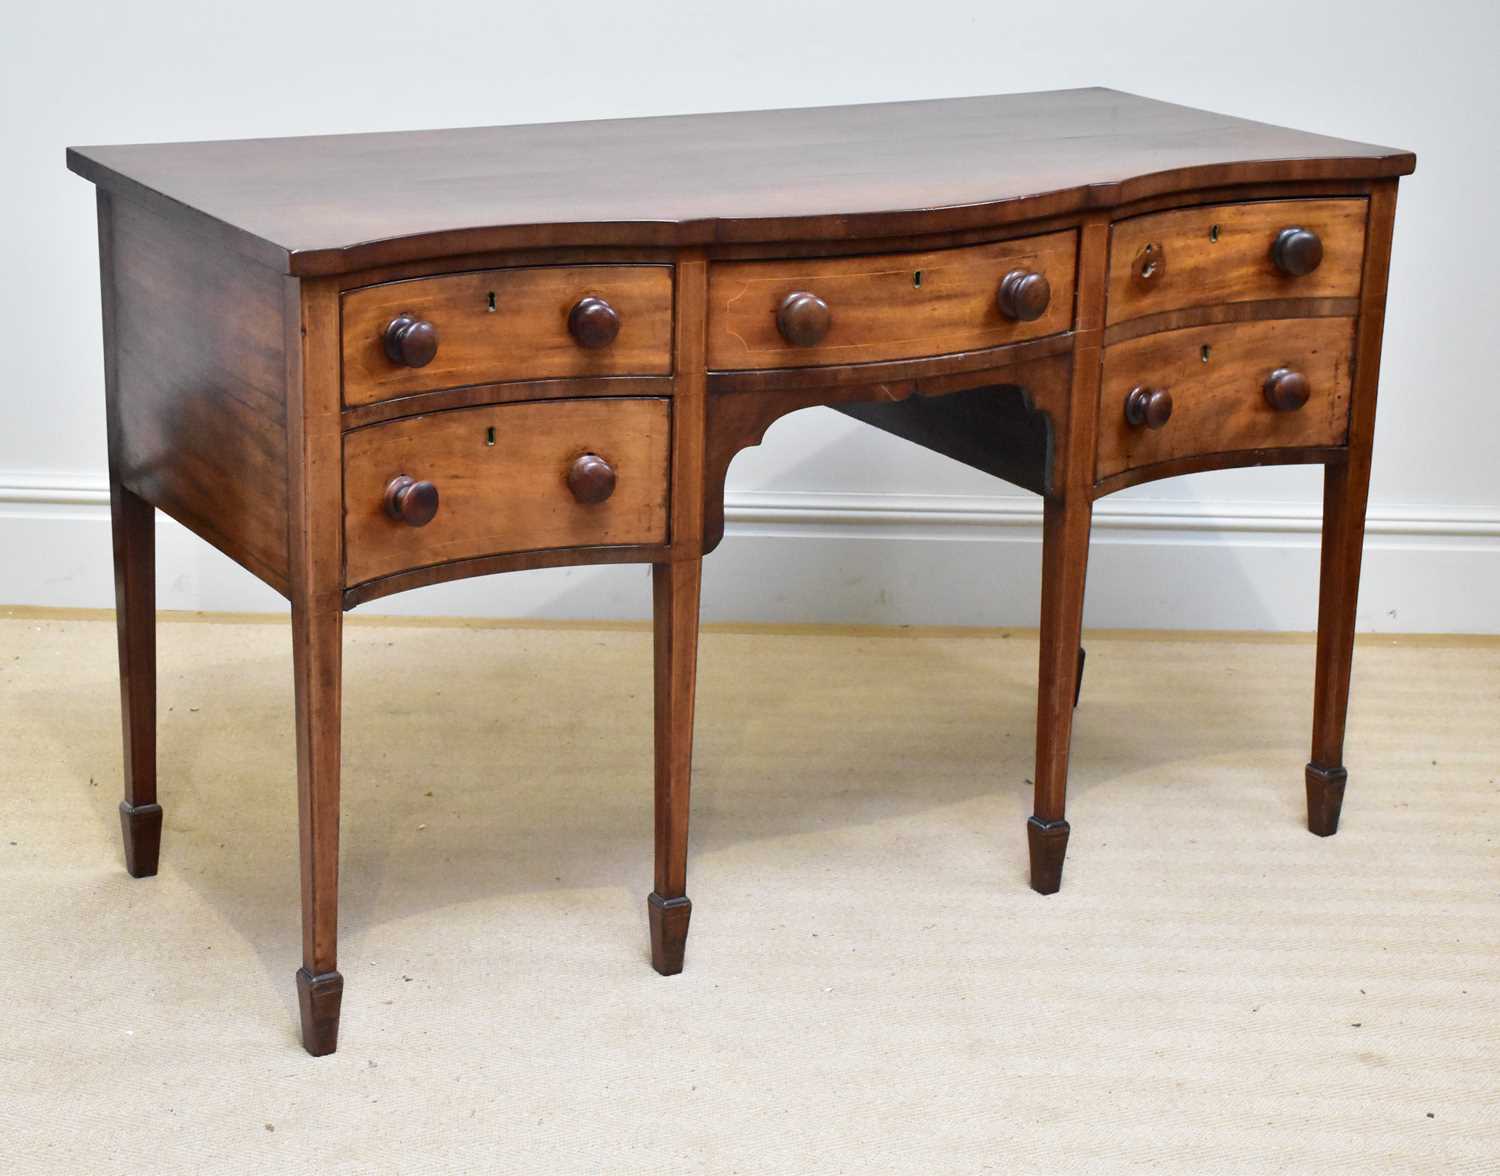 A late George III serpentine mahogany sideboard with three short drawers and one deep drawer on